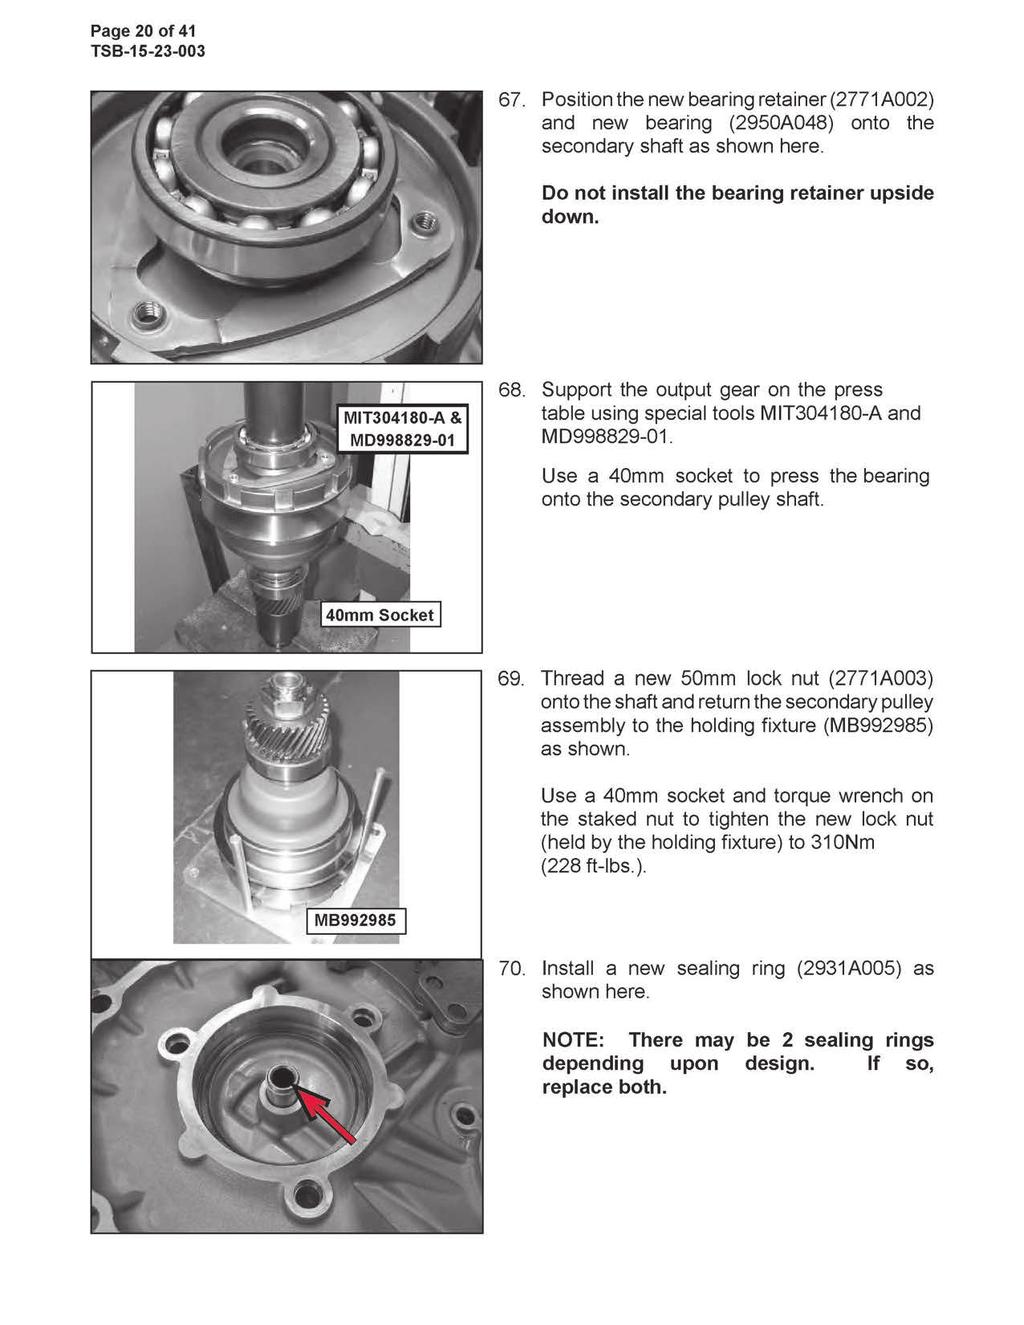 Page 20 of 41 67. Position the new bearing retainer (2771 A002) and new bearing (2950A048) onto the secondary shaft as shown here. Do not install the bearing retainer upside down. 68.